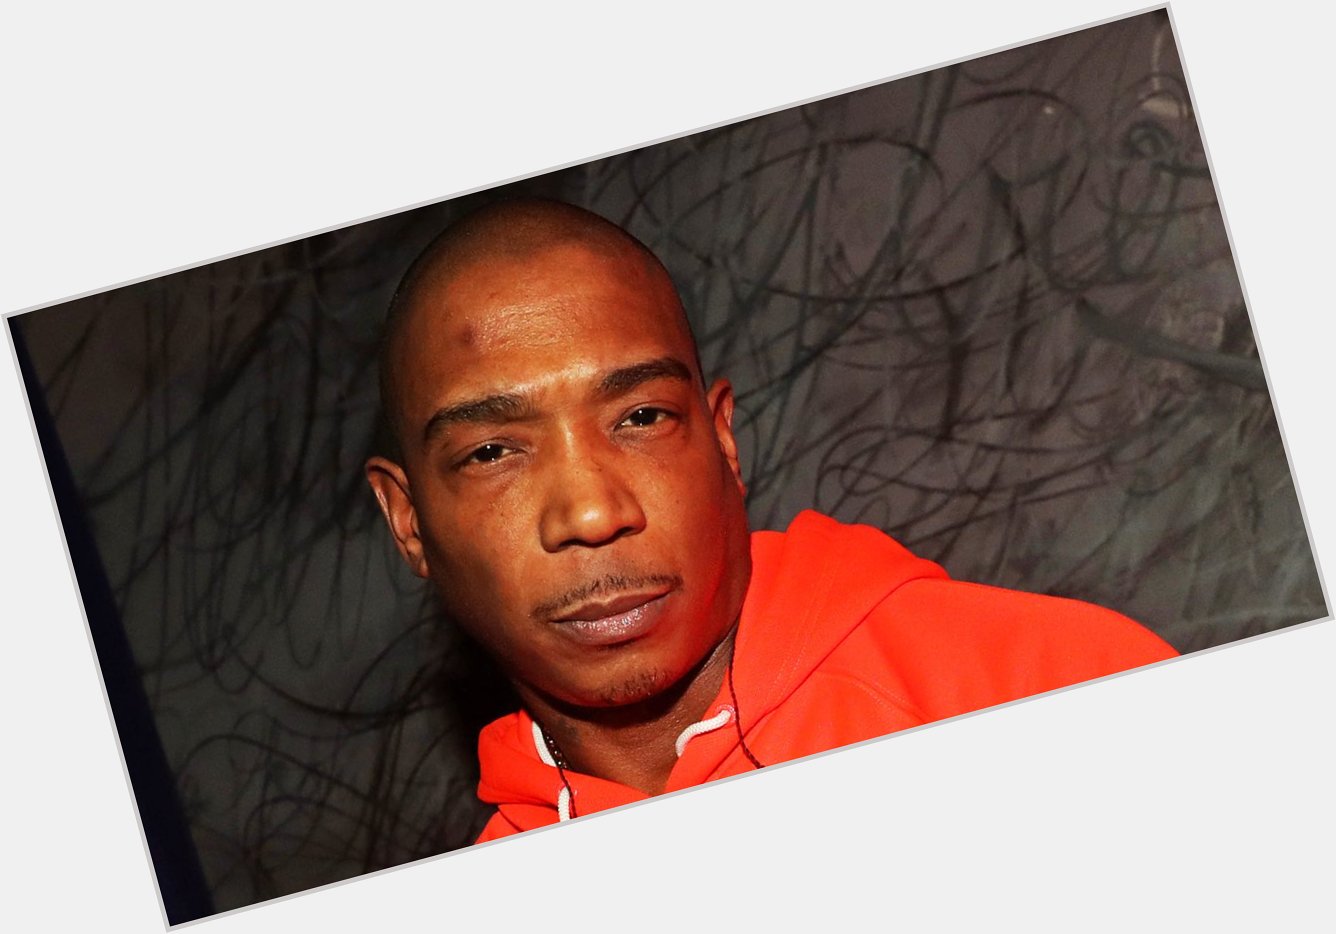 Born February 29th, 1976, today is Ja Rule\s eleventh birthday. Happy 11th, mister Rule! 